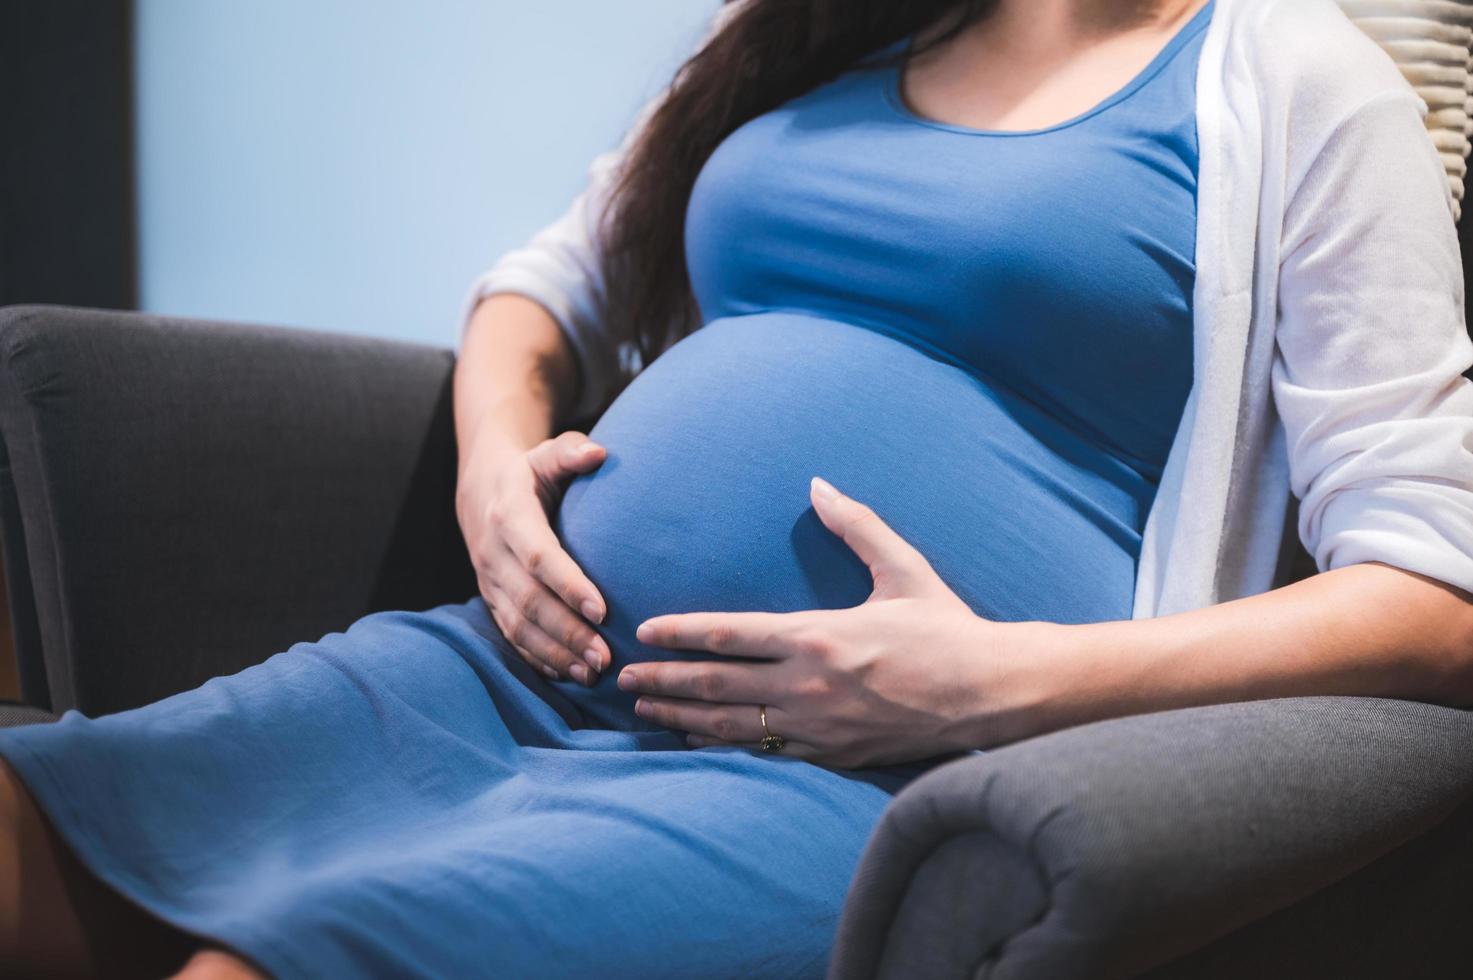 Pregnant woman wearing blue dress with her hands on her stomach photo